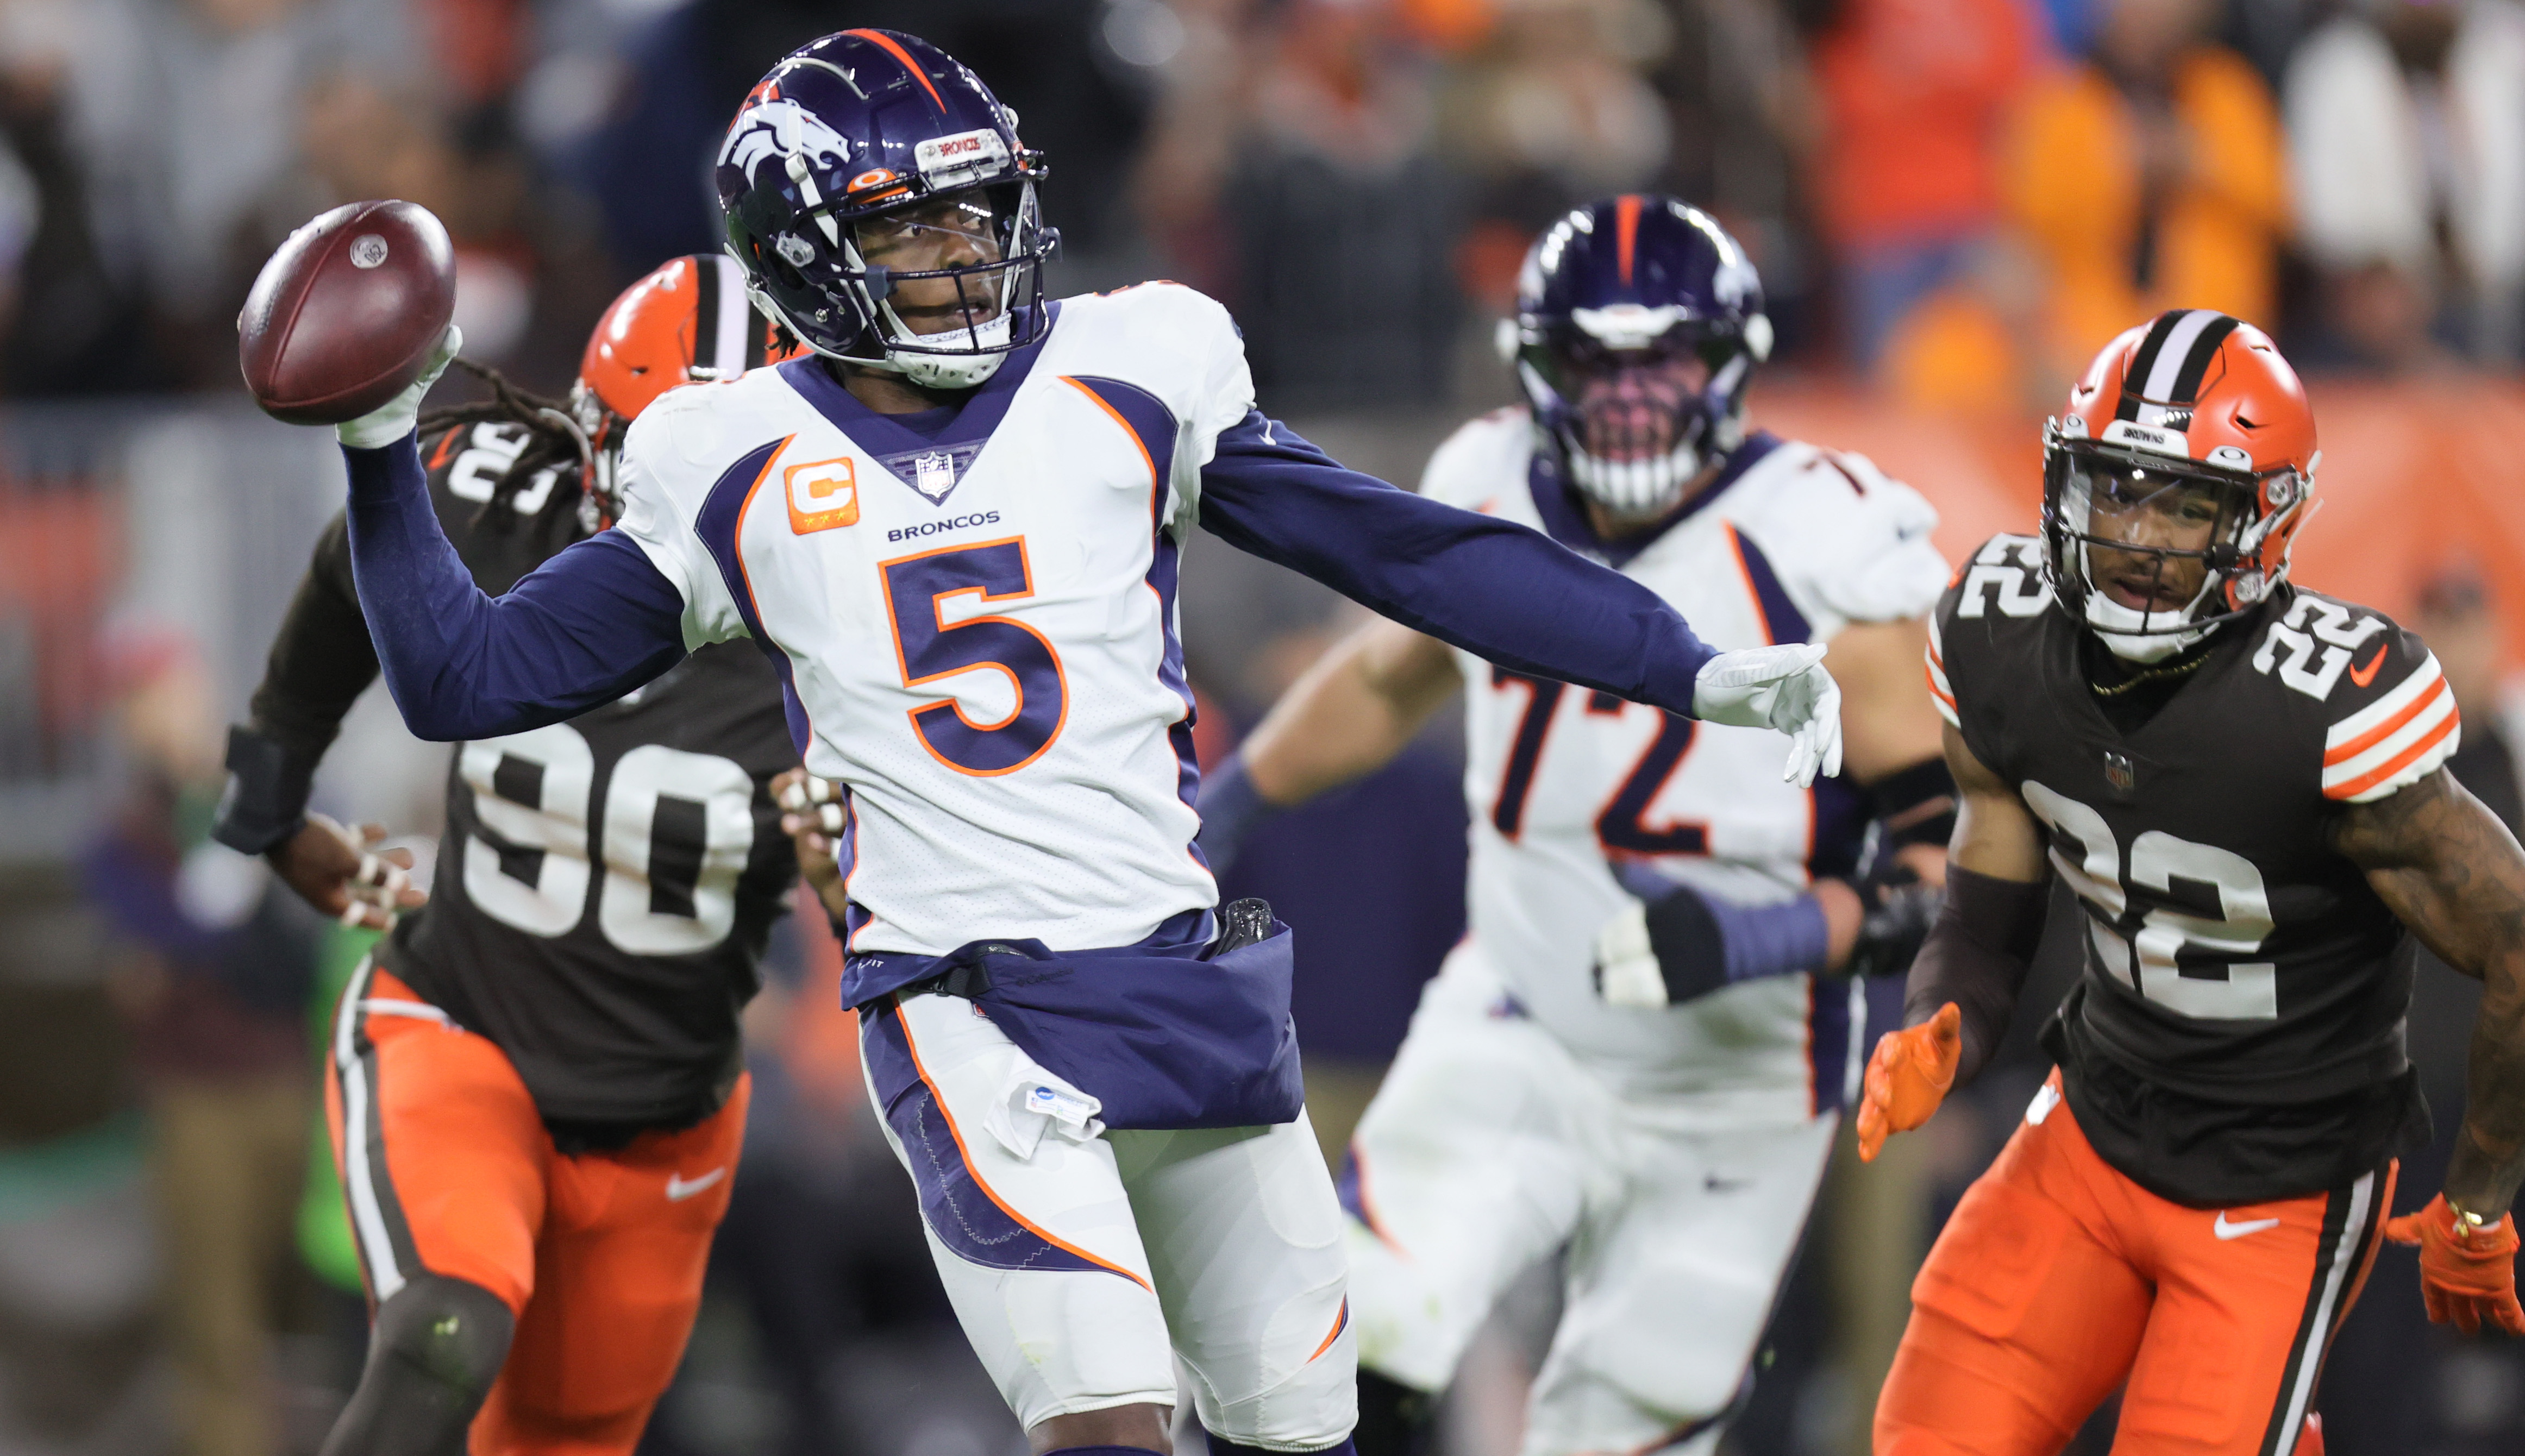 Philadelphia Eagles at Denver Broncos (11/14/21) How to watch NFL games, time, channel, live stream, betting odds